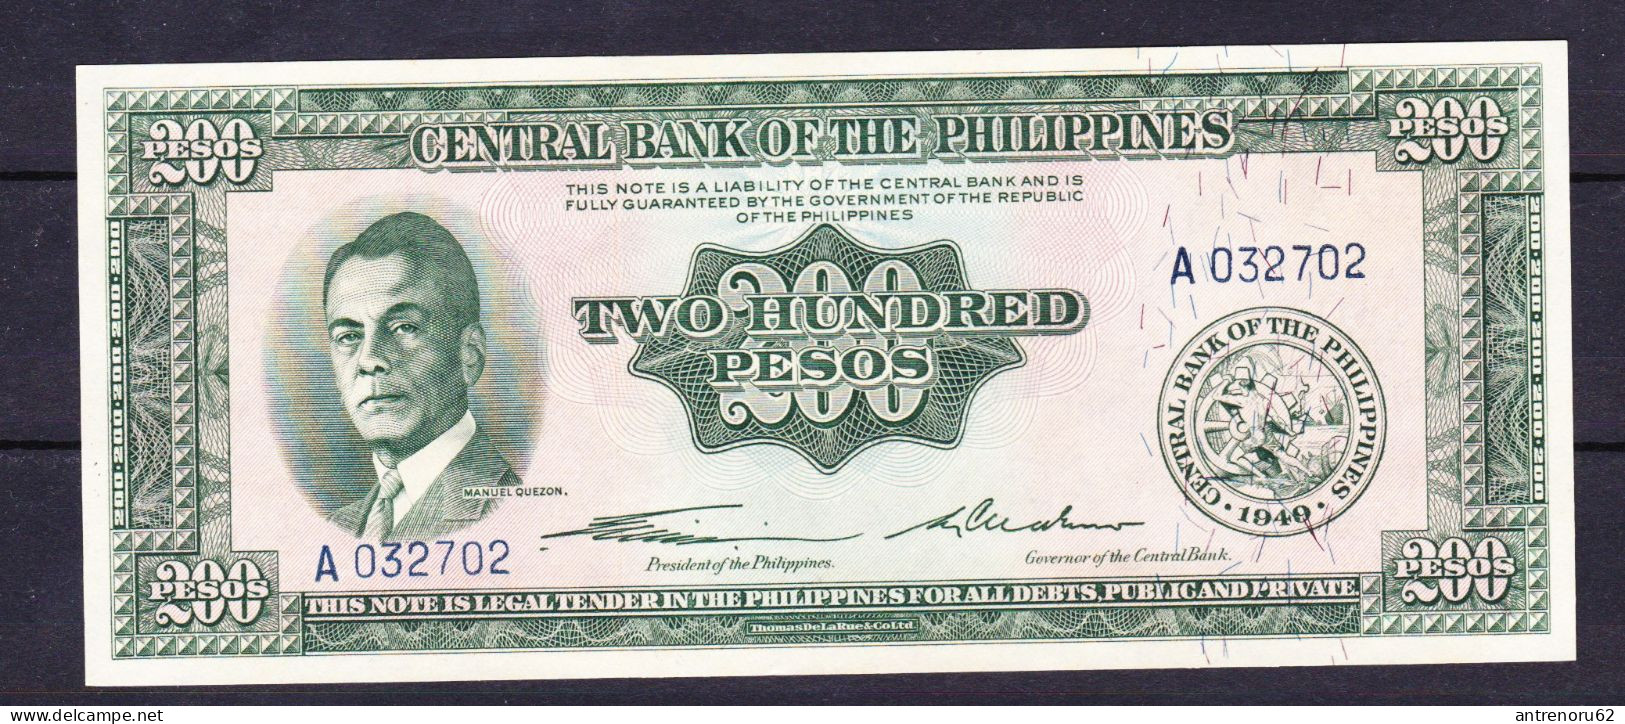 BANKNOTES-1949-PHILIPPINES-200-UNC-SEE-SCAN - Filipinas